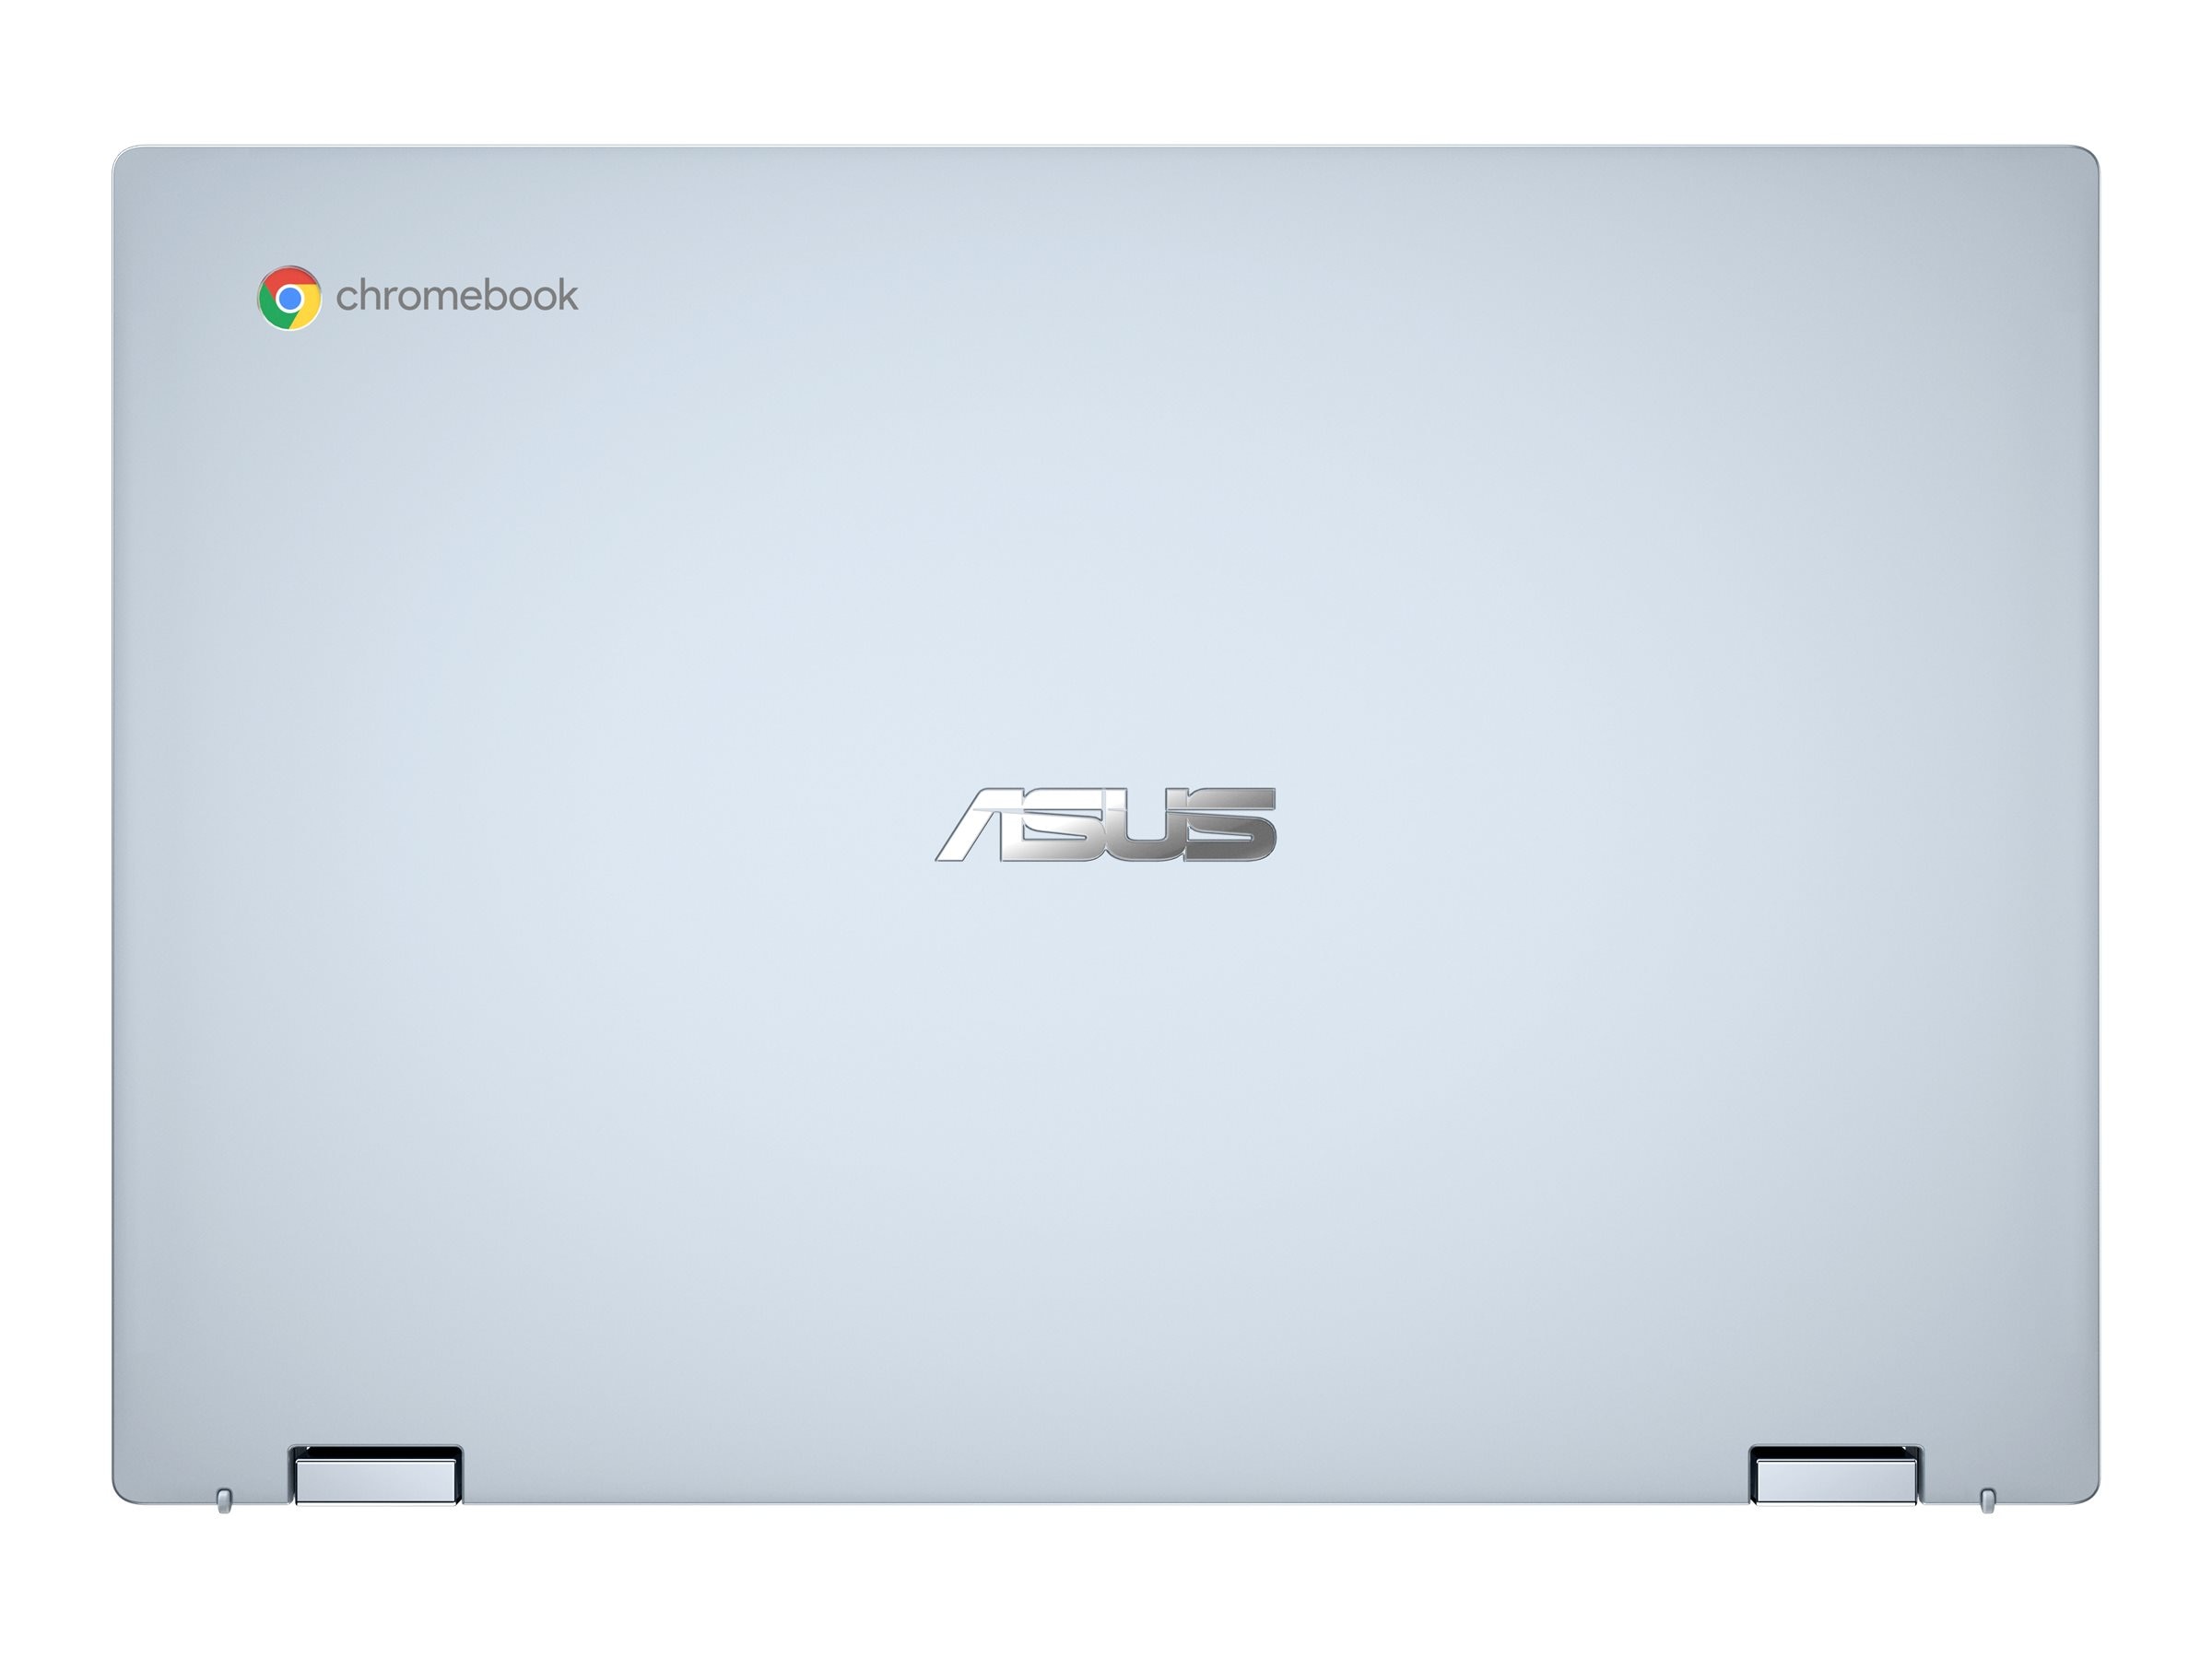 Asus Notebook Core i7-1160G7 16GB 512GB 14 Chrome OS (CX3400FMA-DH762T-S)